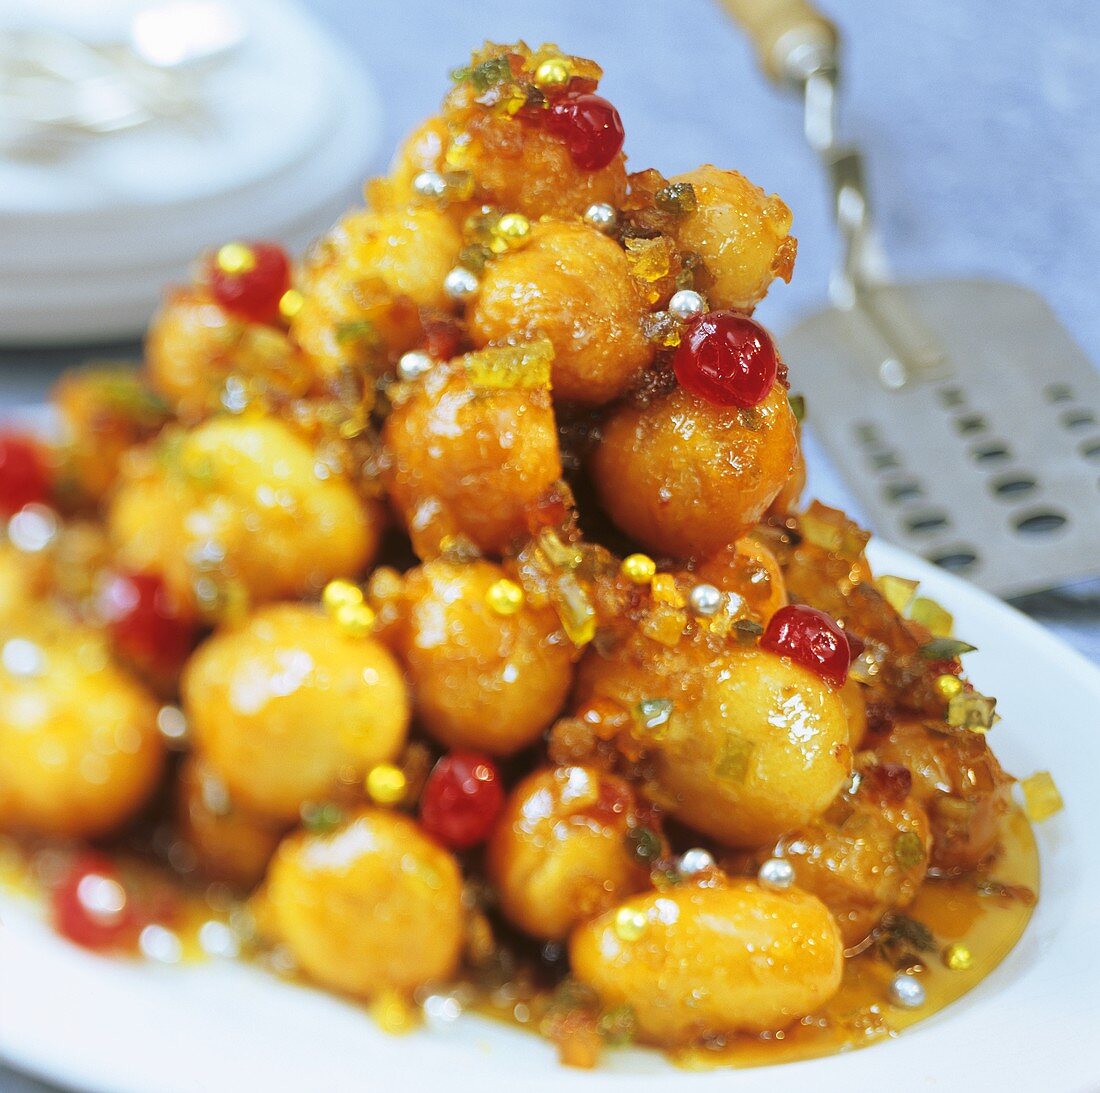 Struffoli (deep-fried pastry balls with candied fruit)